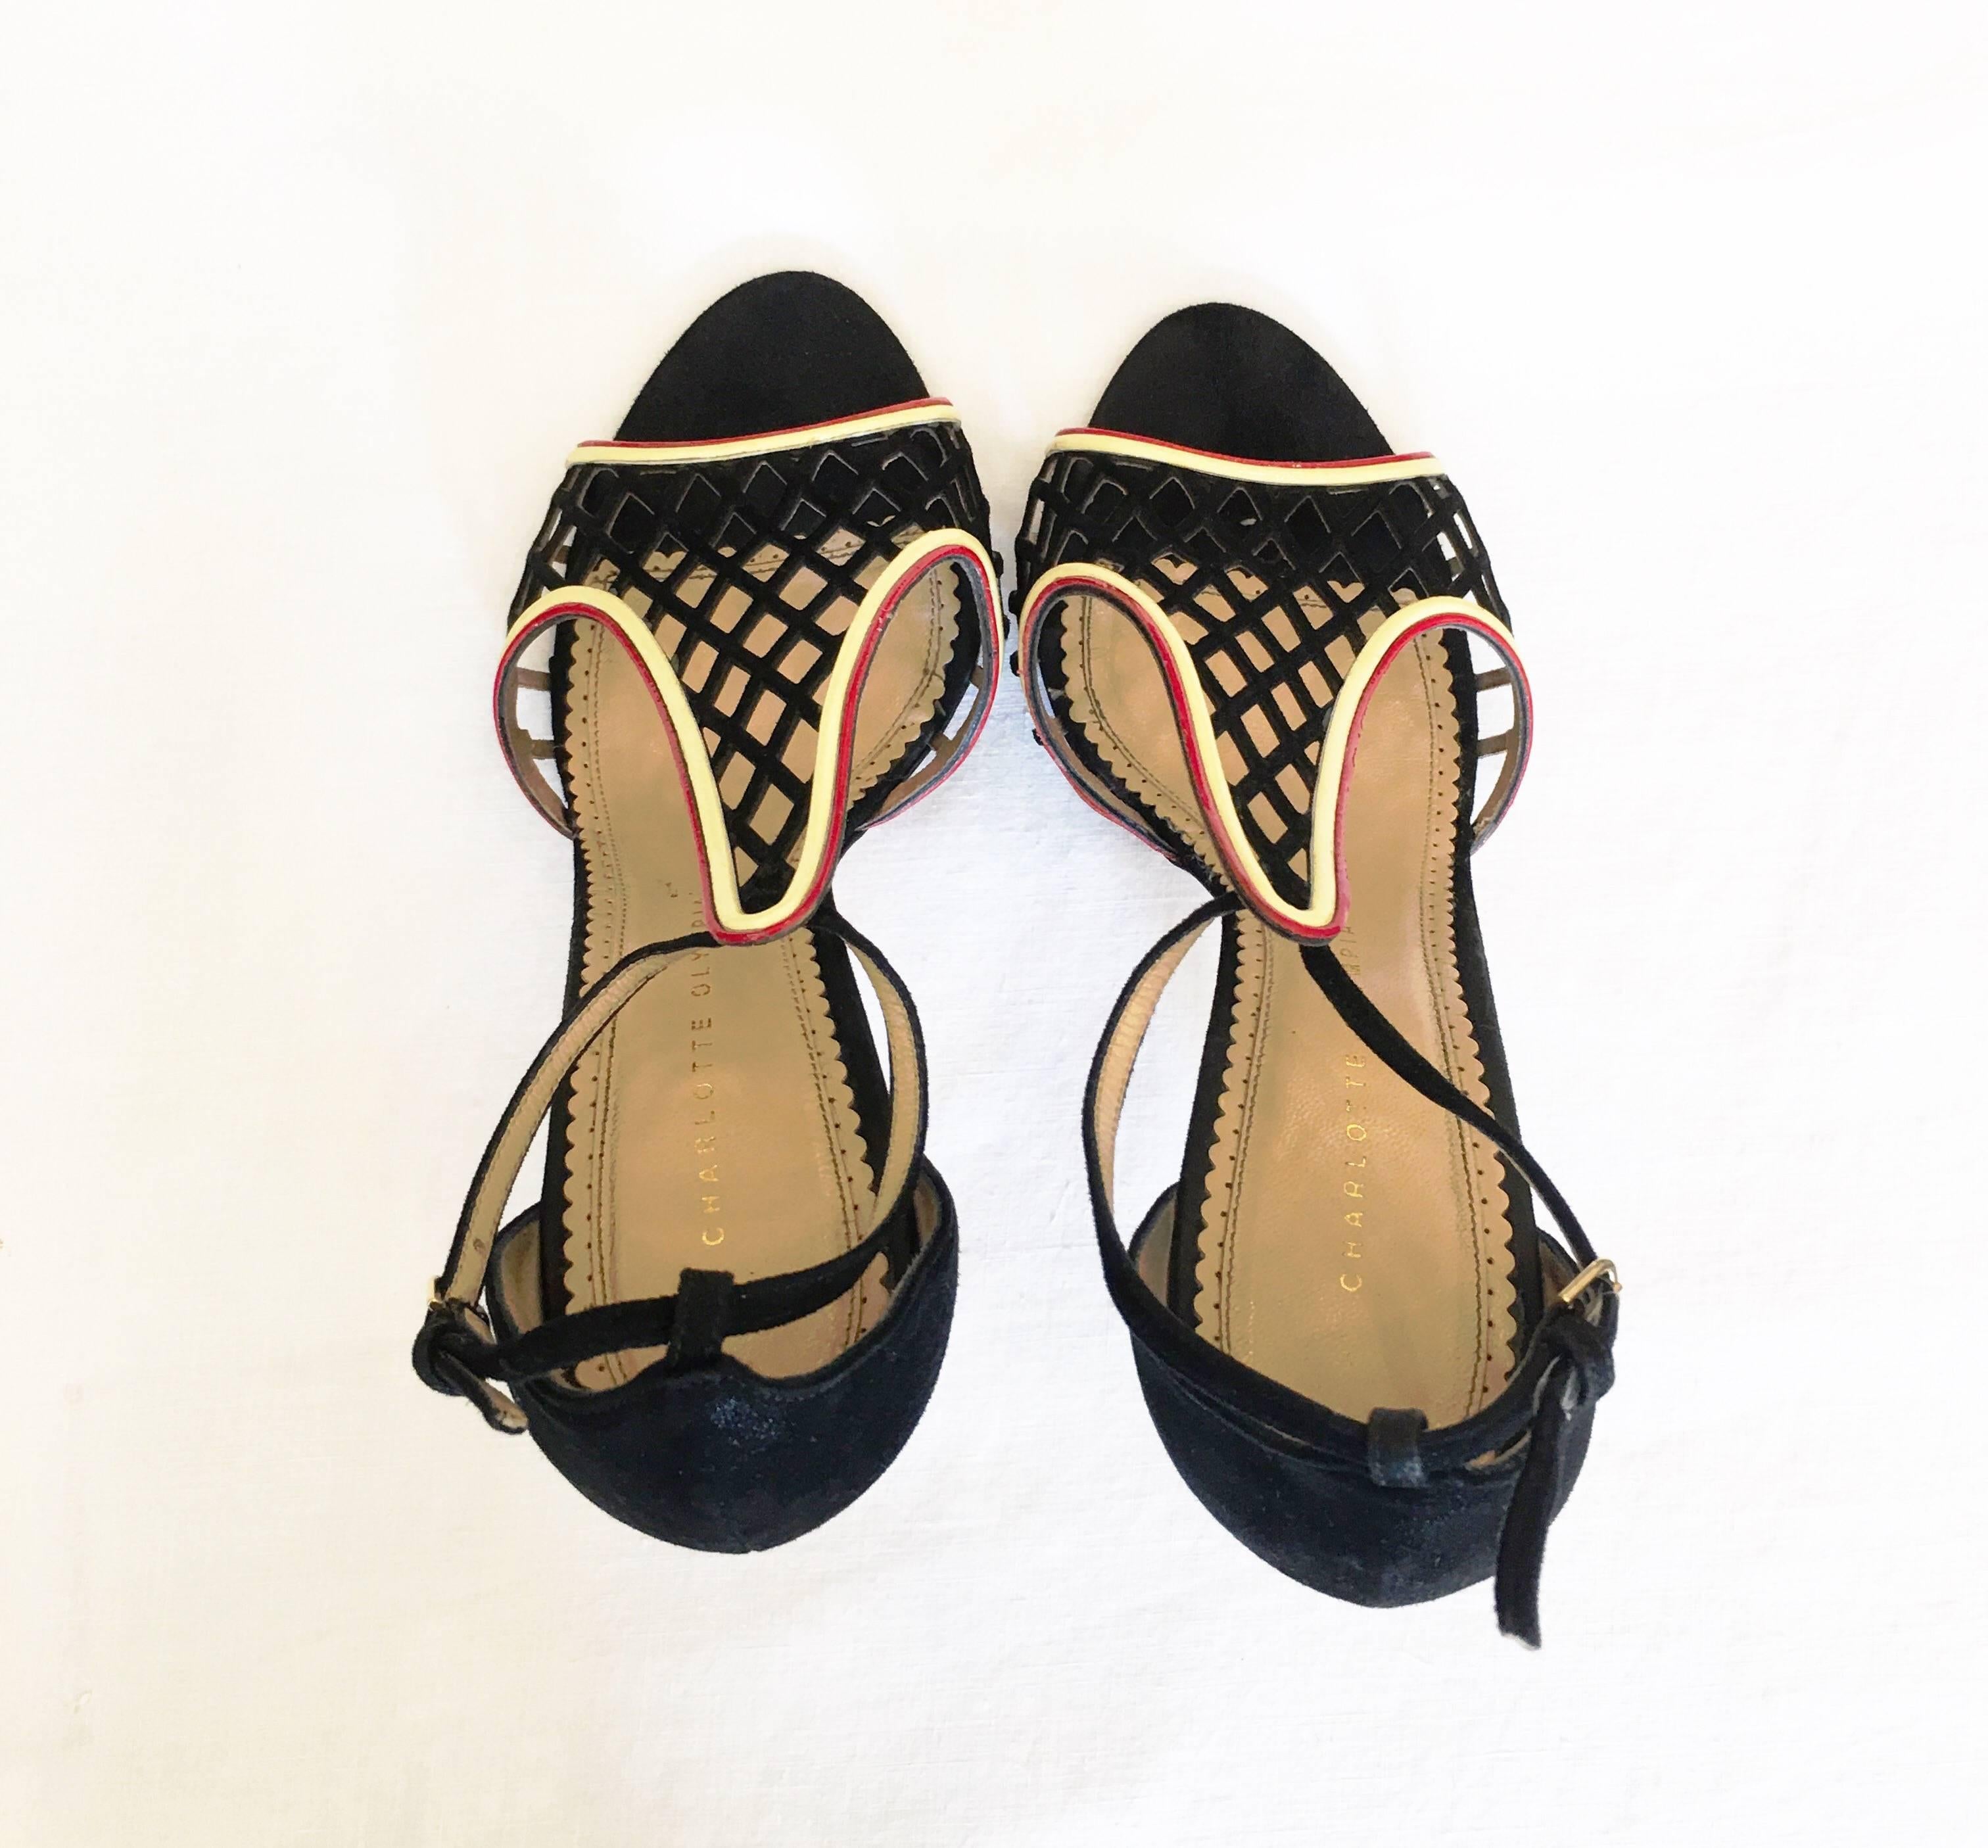 Charlotte Olympia Suede Stiletto Heels Size 42 In Excellent Condition For Sale In Brooklyn, NY